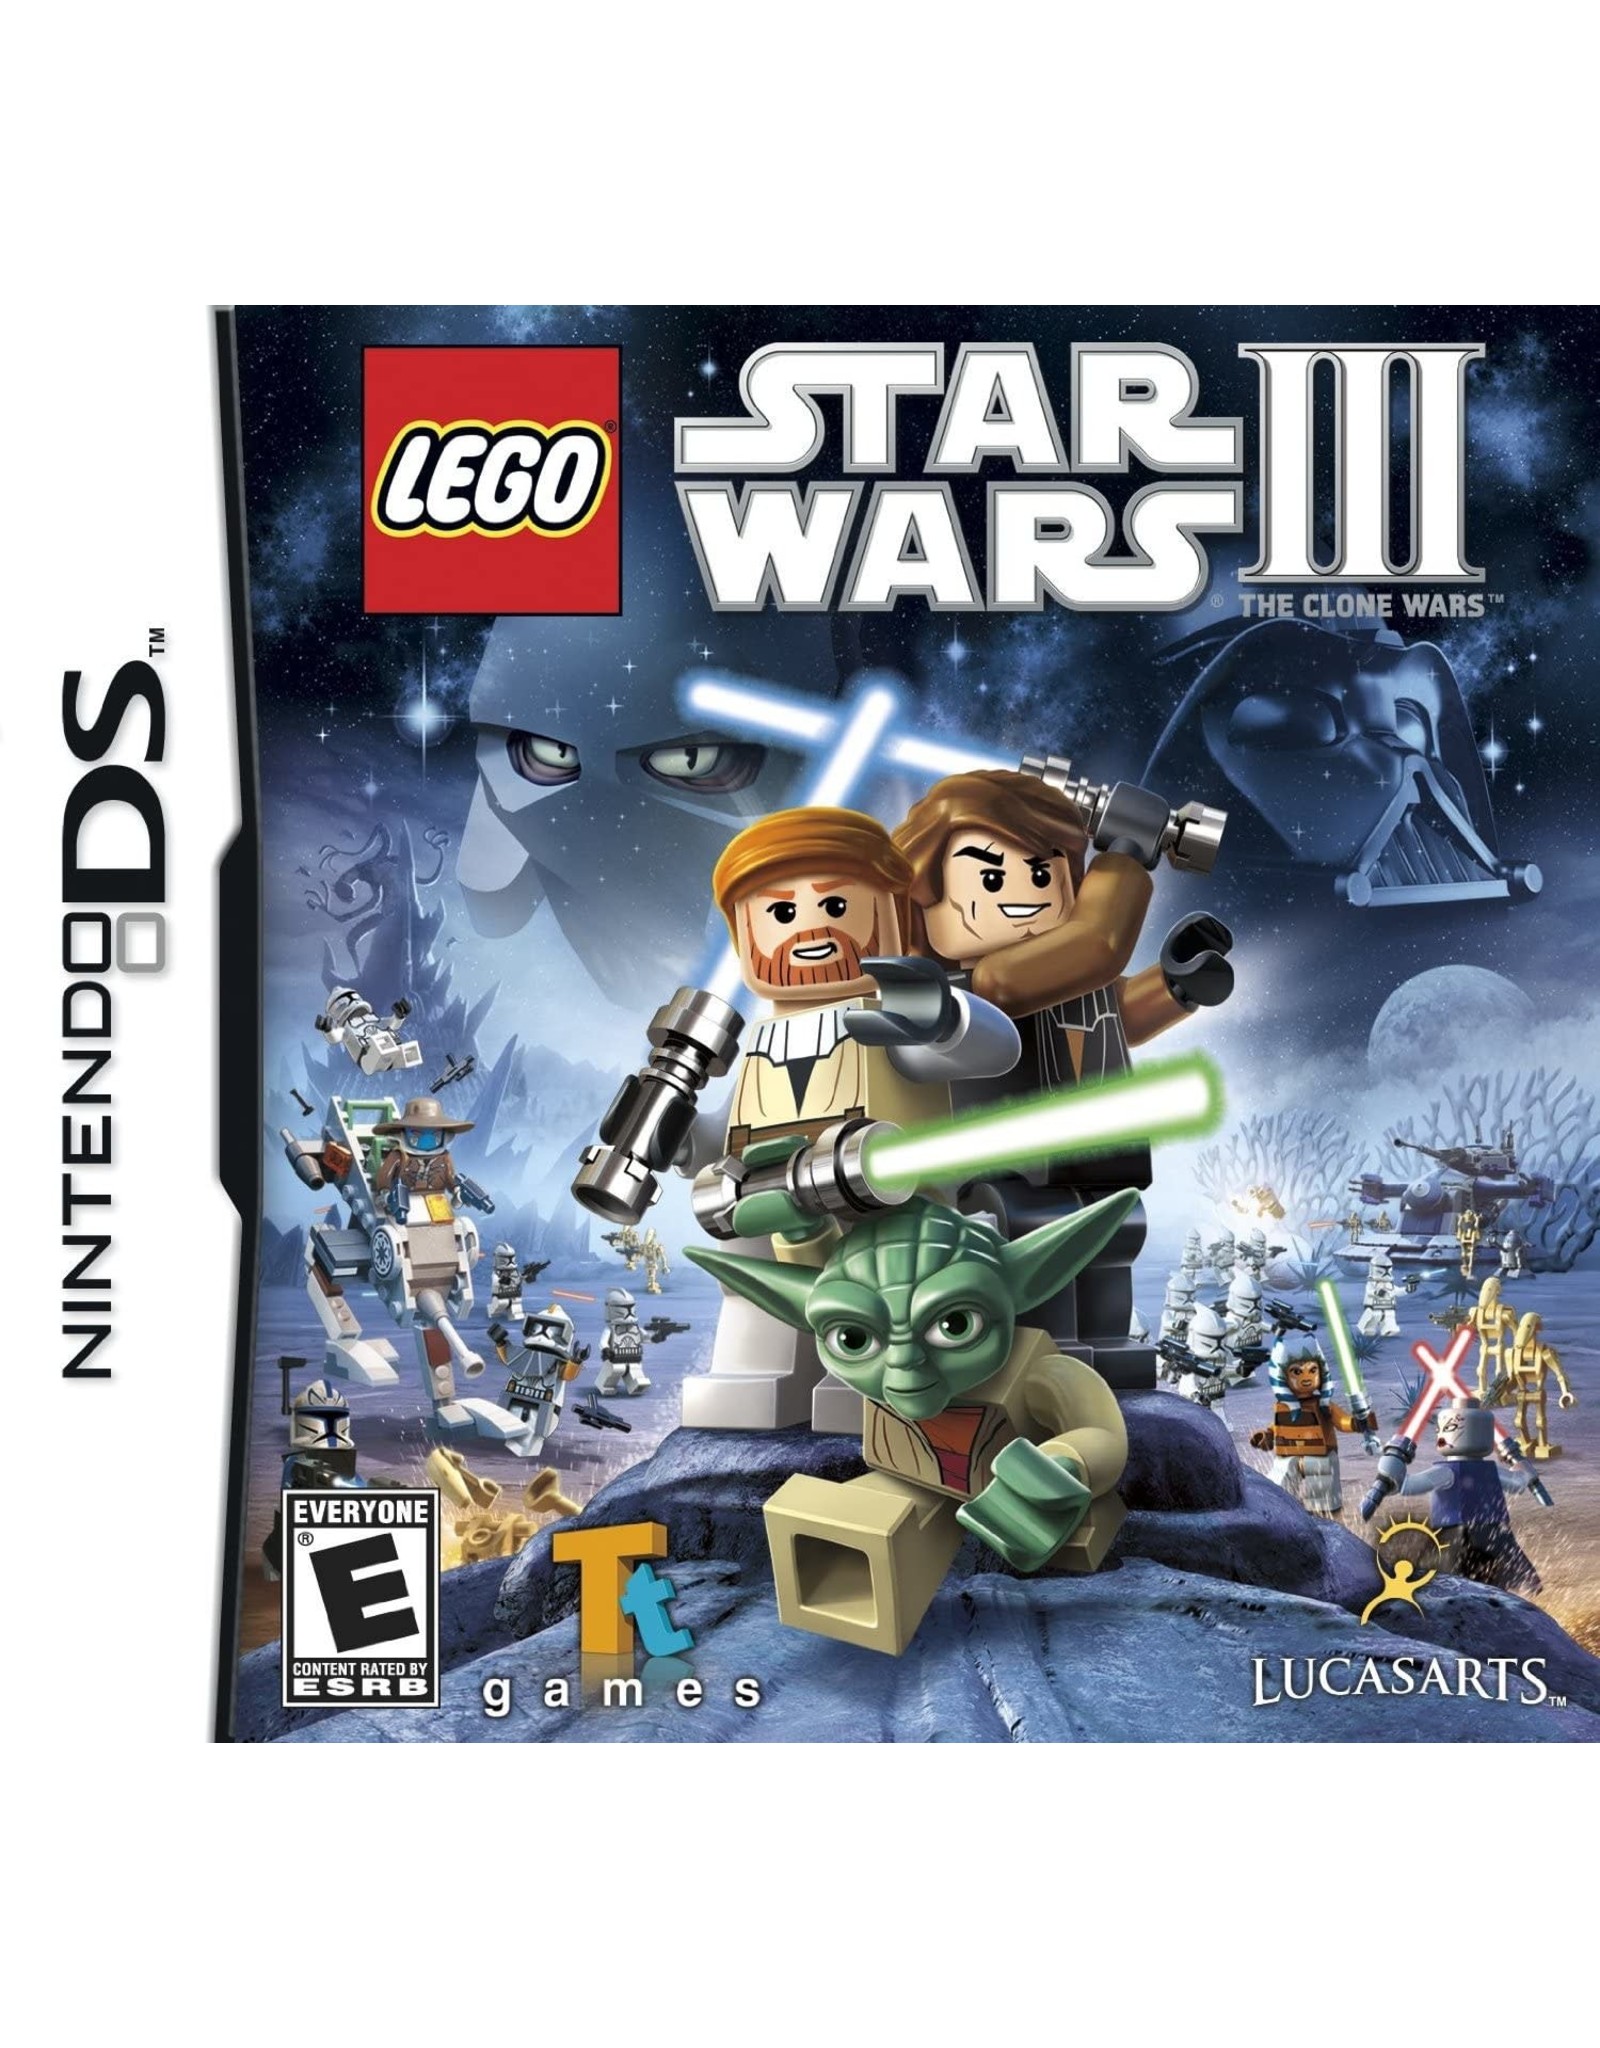 Nintendo DS LEGO Star Wars III: The Clone Wars (Cart Only)